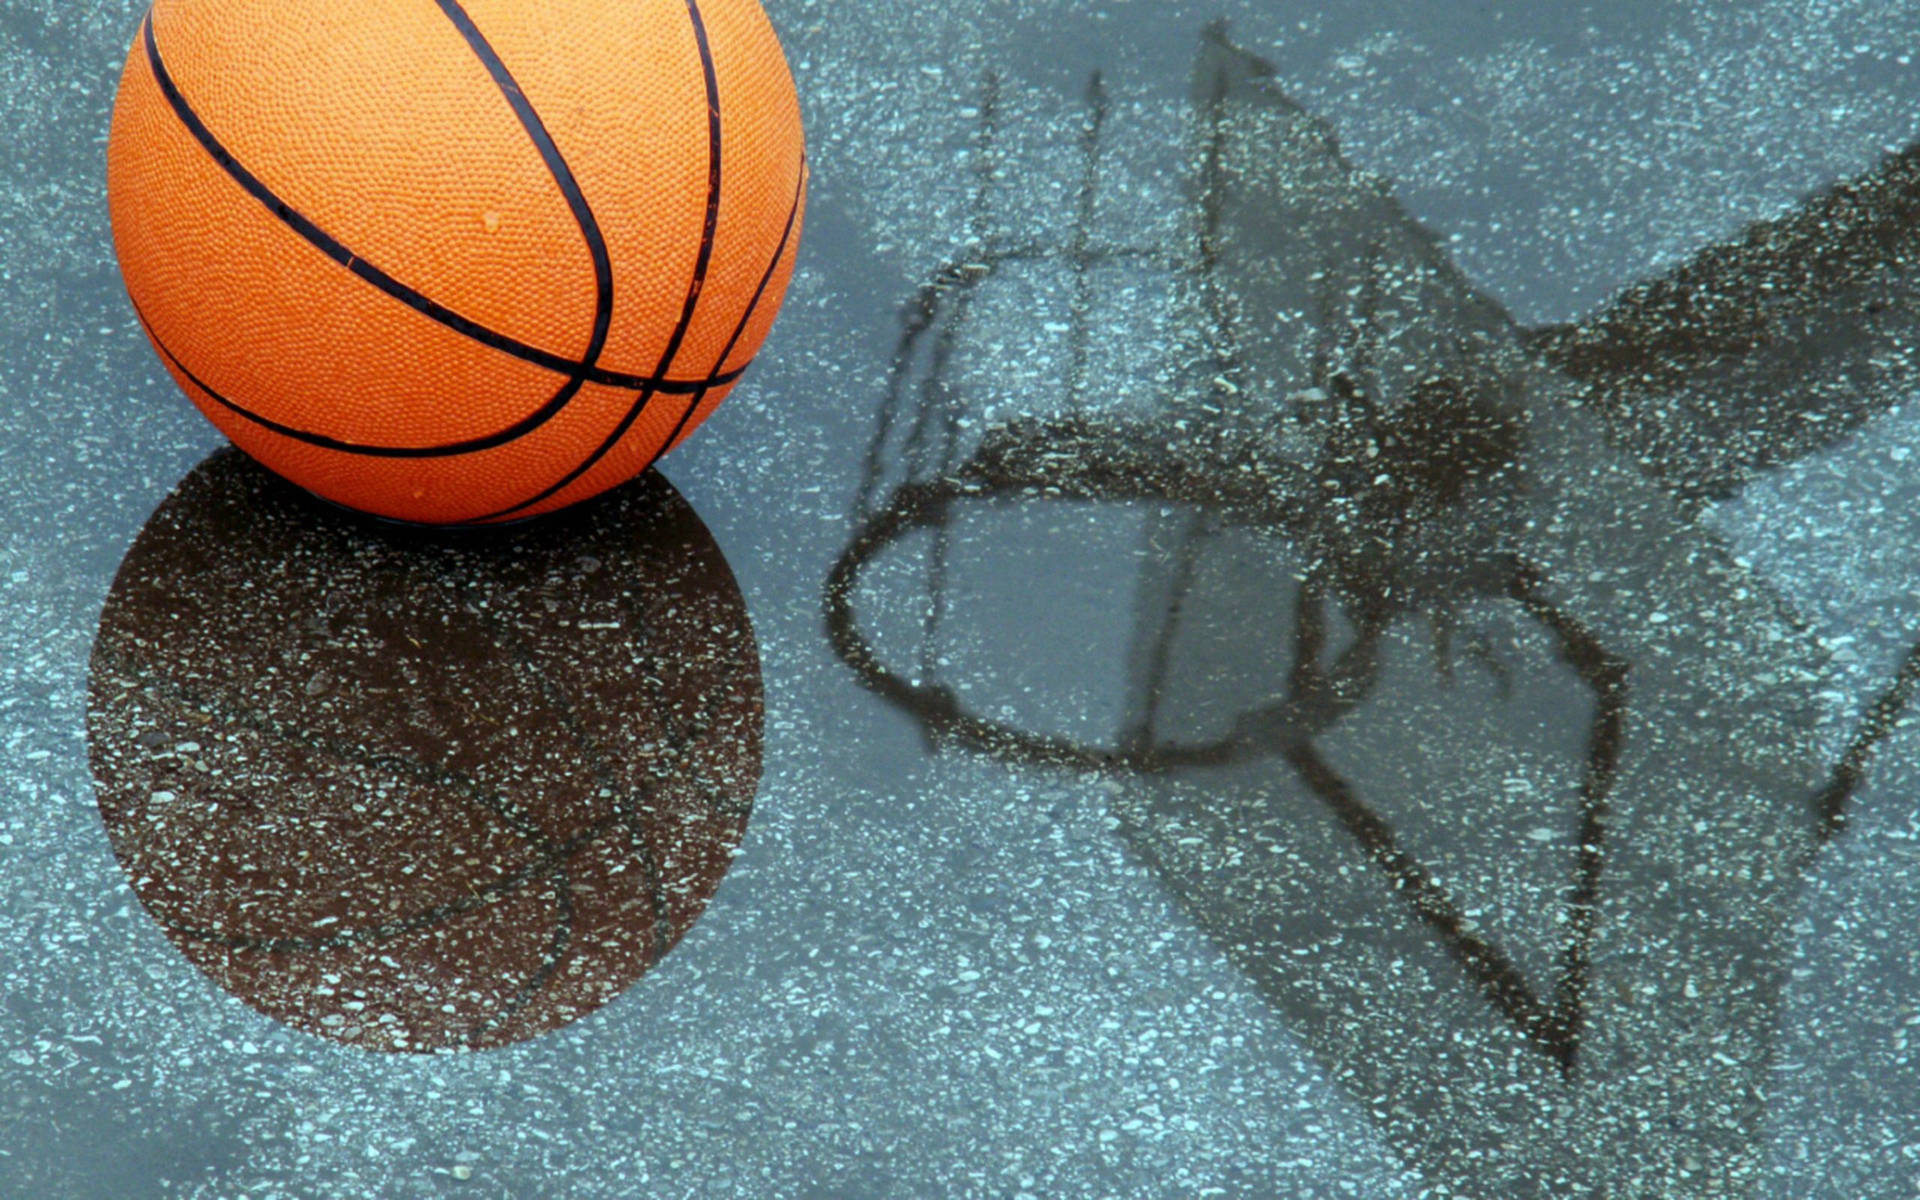 2560X1600 Basketball Wallpaper and Background